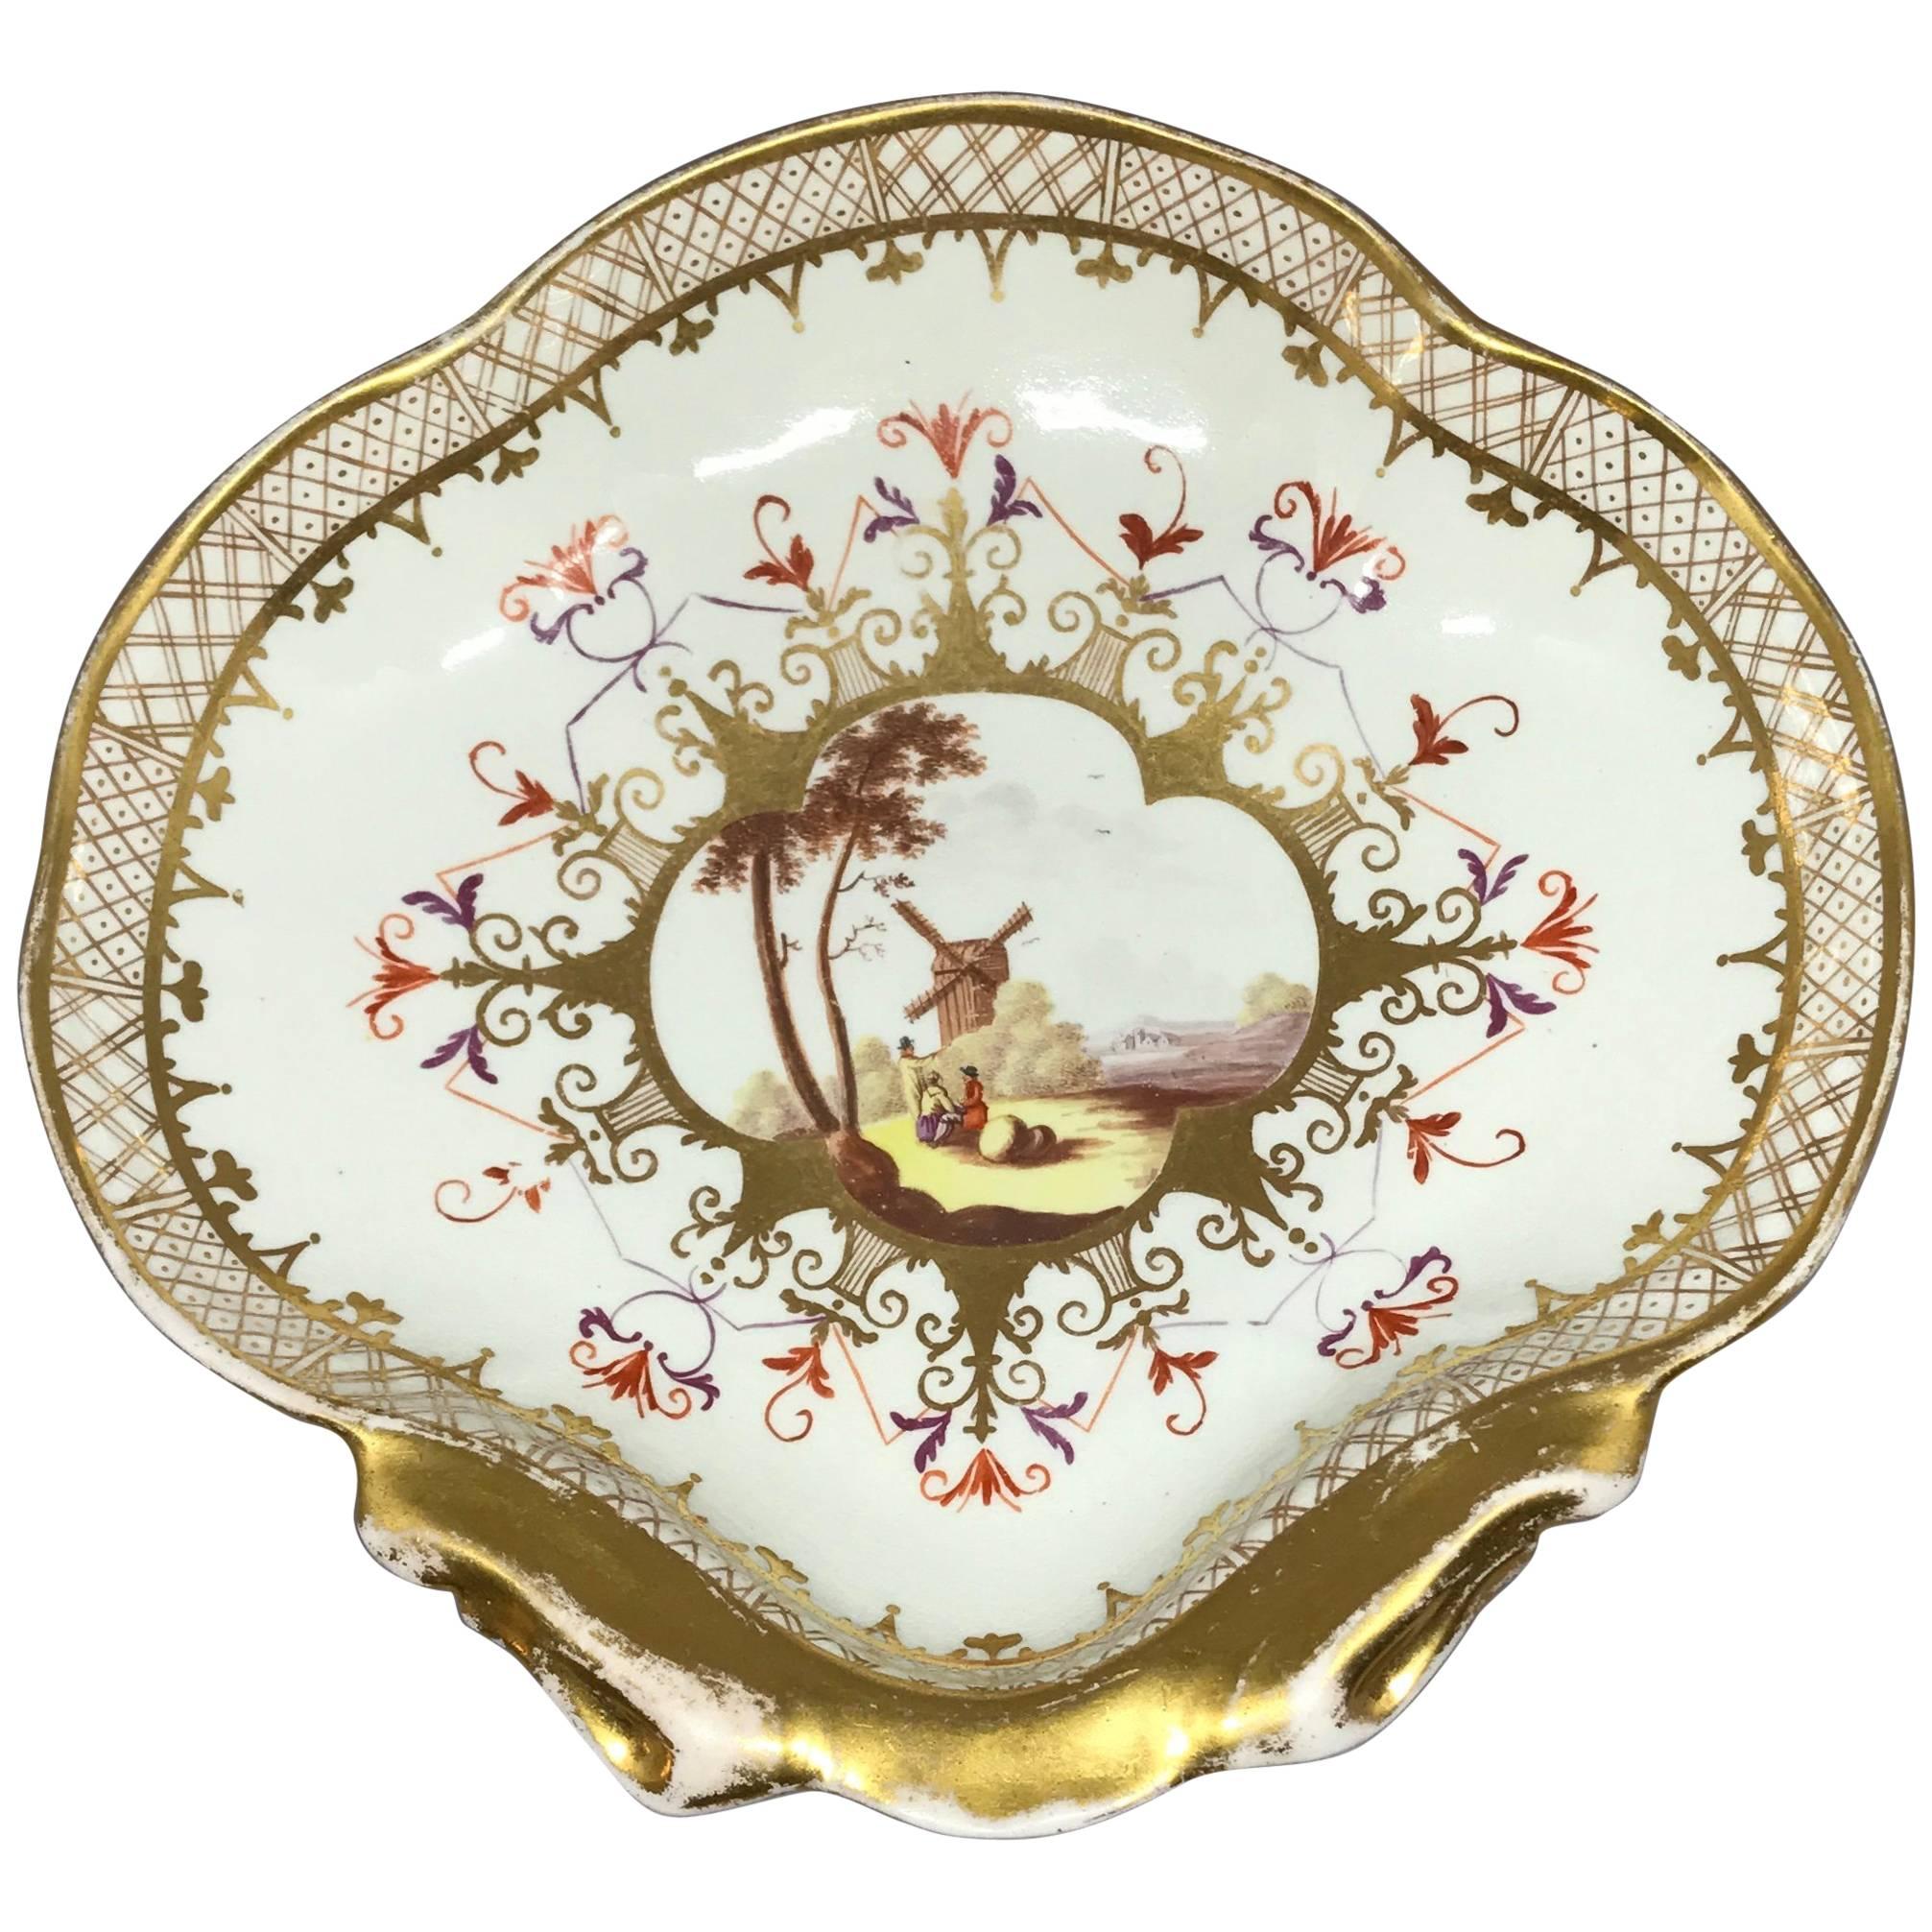 English Iron Red and Gilt Shell Form Serving Dish After Meissen